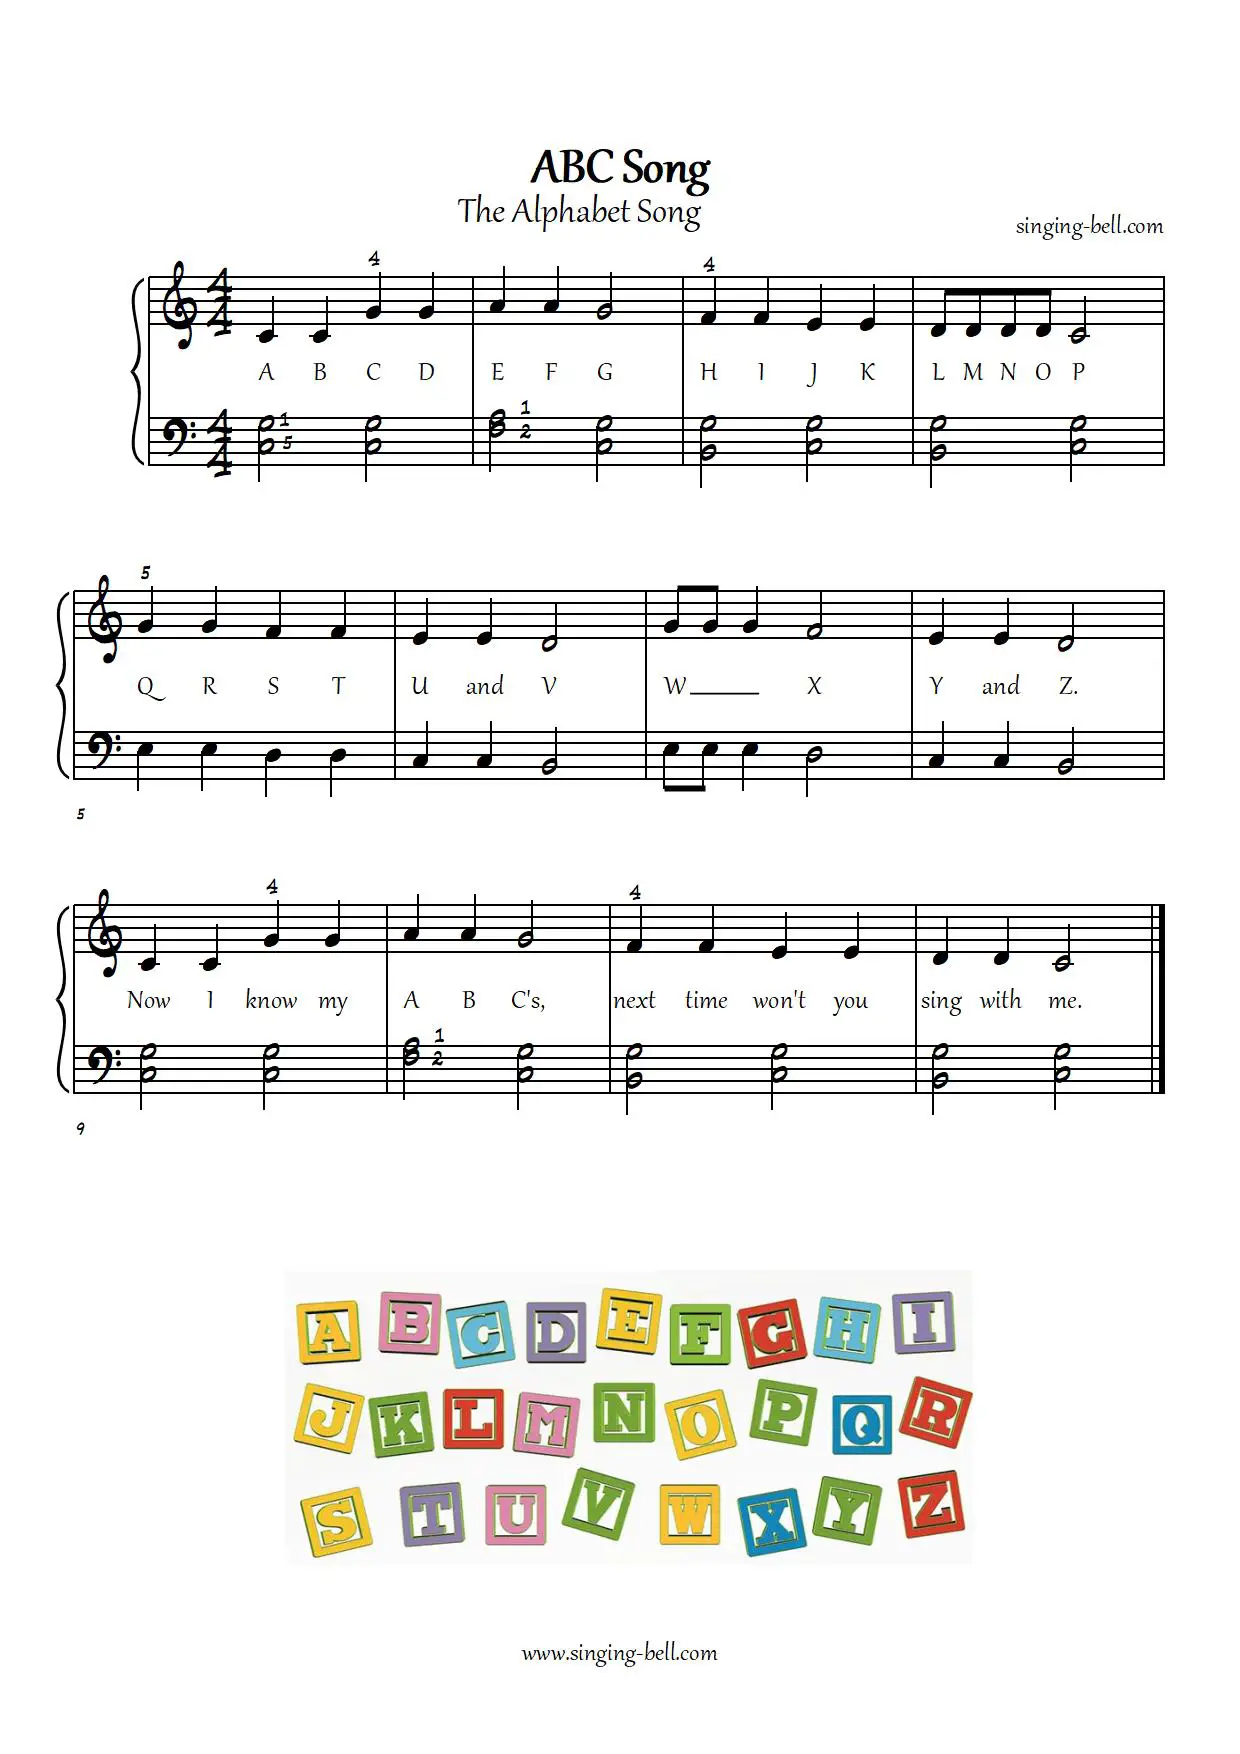 Alphabet song ABC song easy piano sheet music notes chords beginners pdf